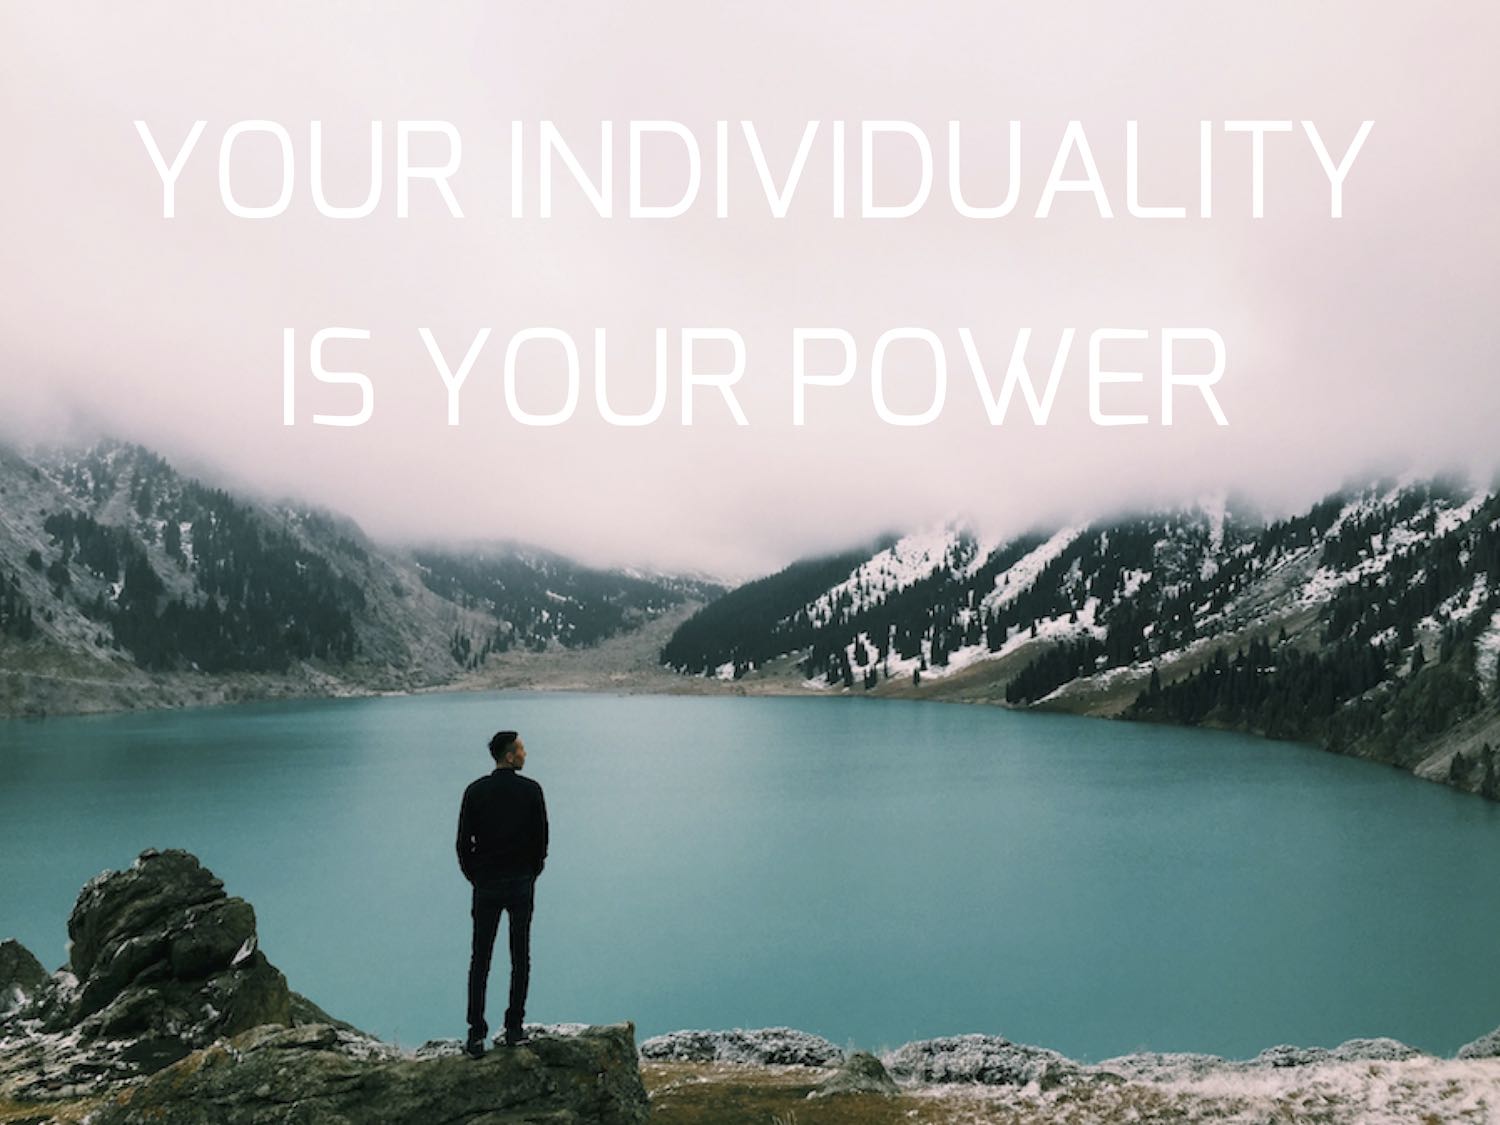 Your individuality is your power